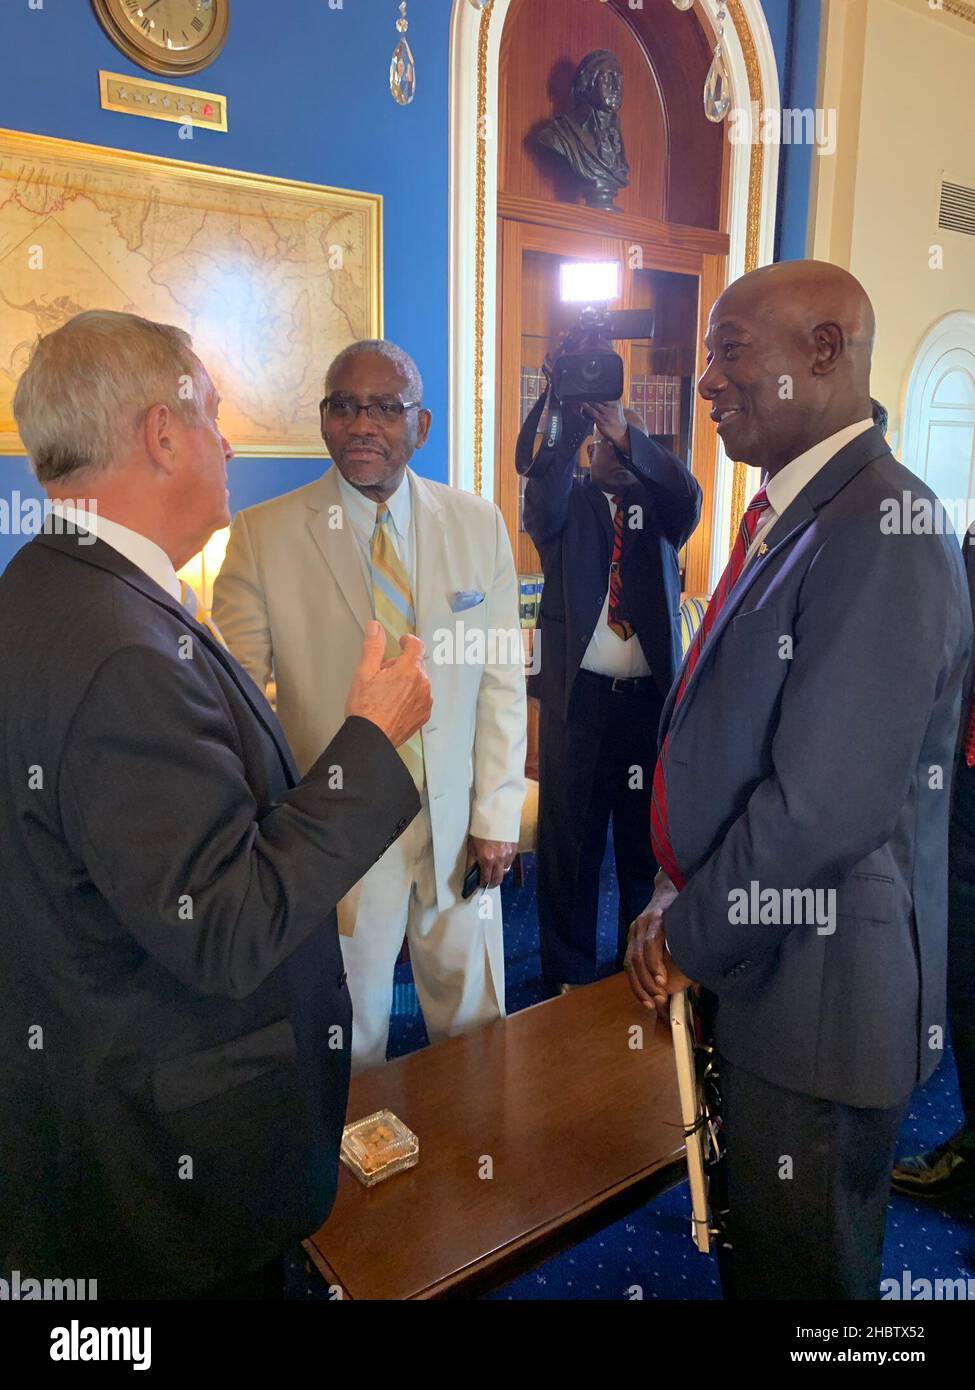 Congressman Gregory Meeks meeting with the Prime Minister of Trinidad & Tobago Keith Rowley to discuss our bilateral relations and the region ca.  13 September 2019 Stock Photo